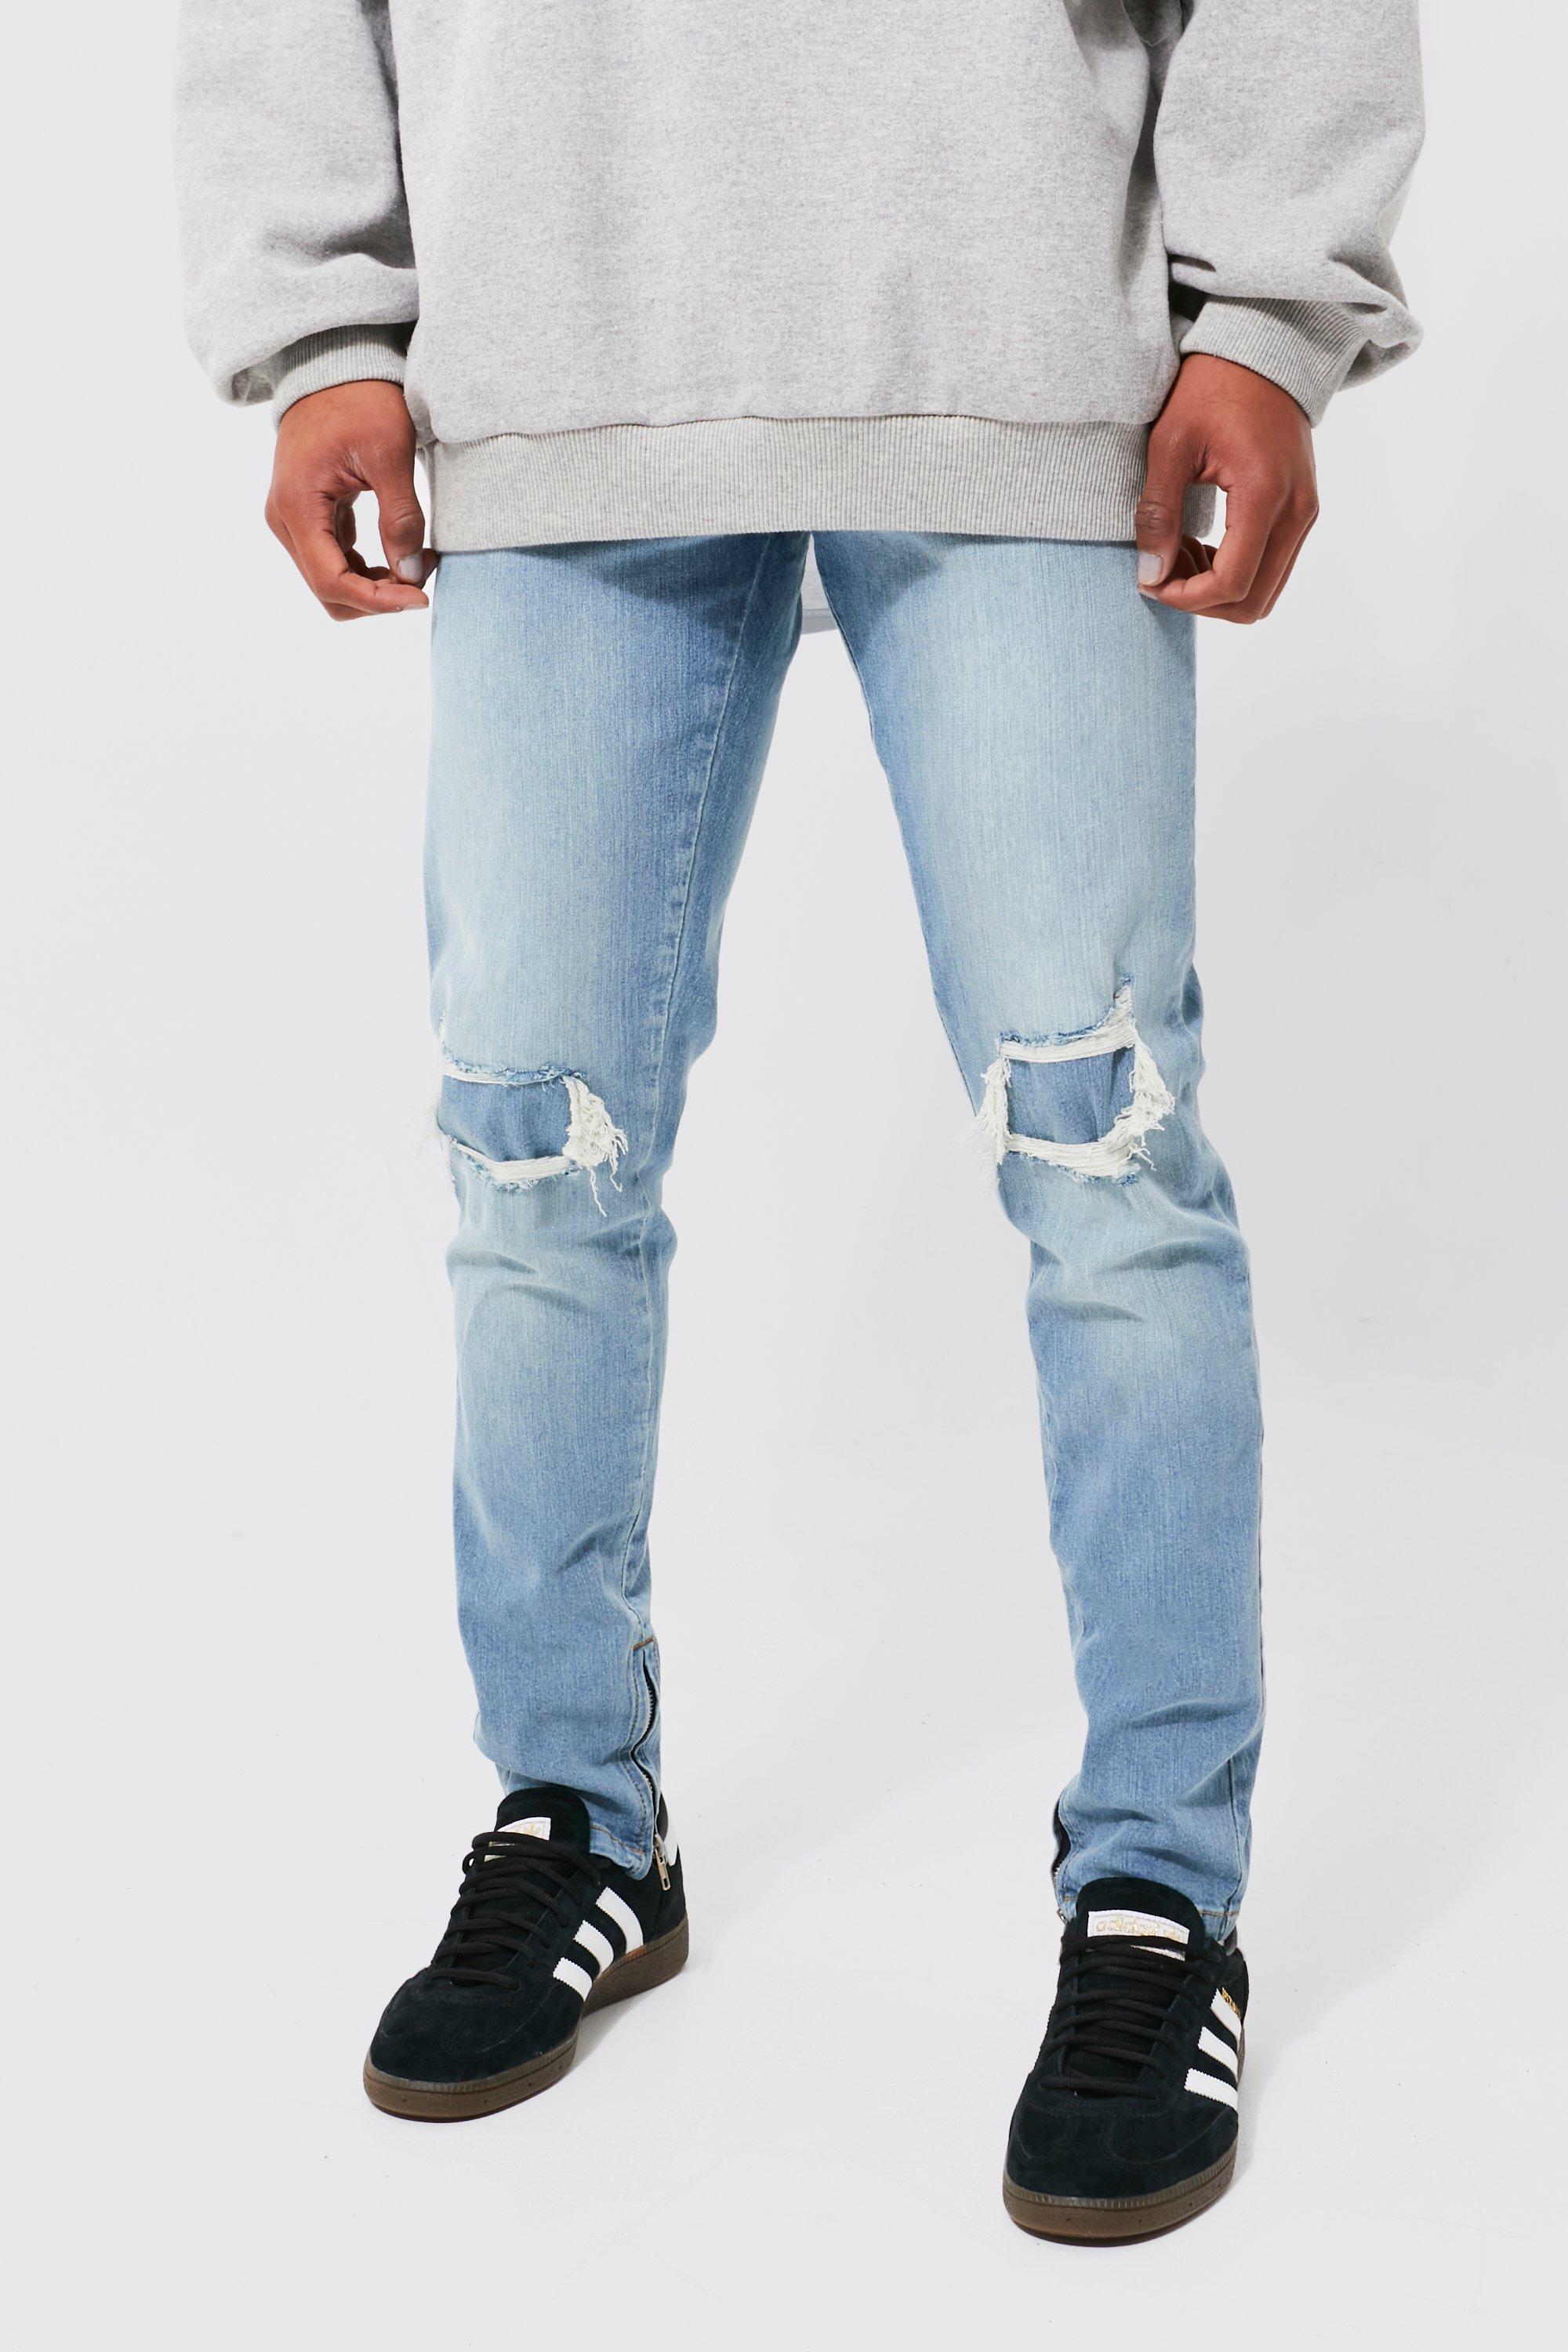 LIGHT BLUE JEANS - RIPPED AND REPAIRED